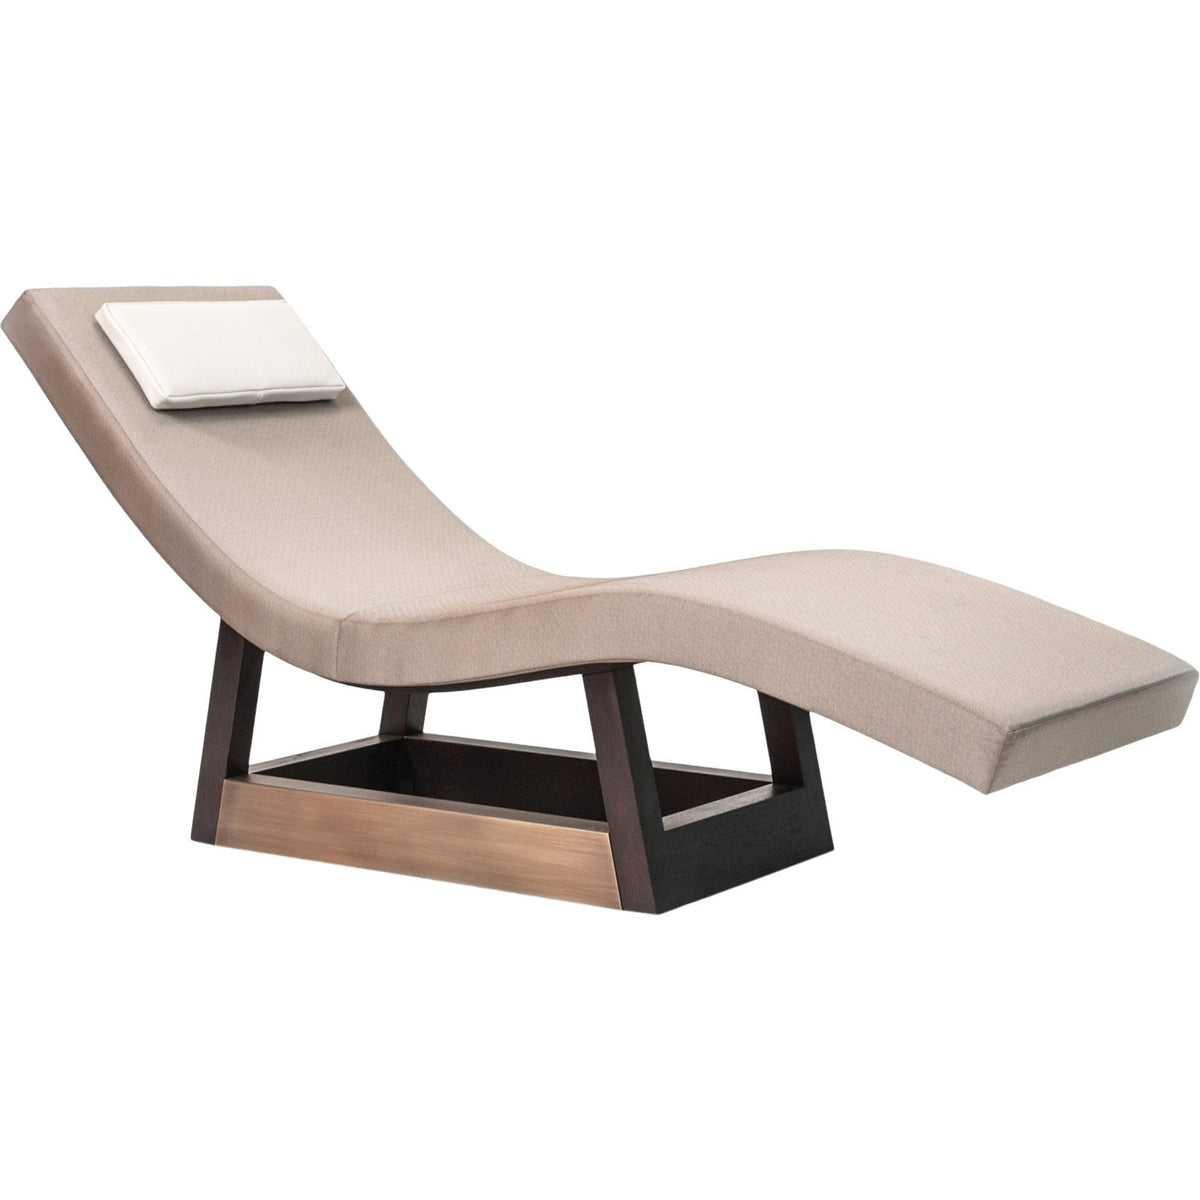 Antibes Chaise